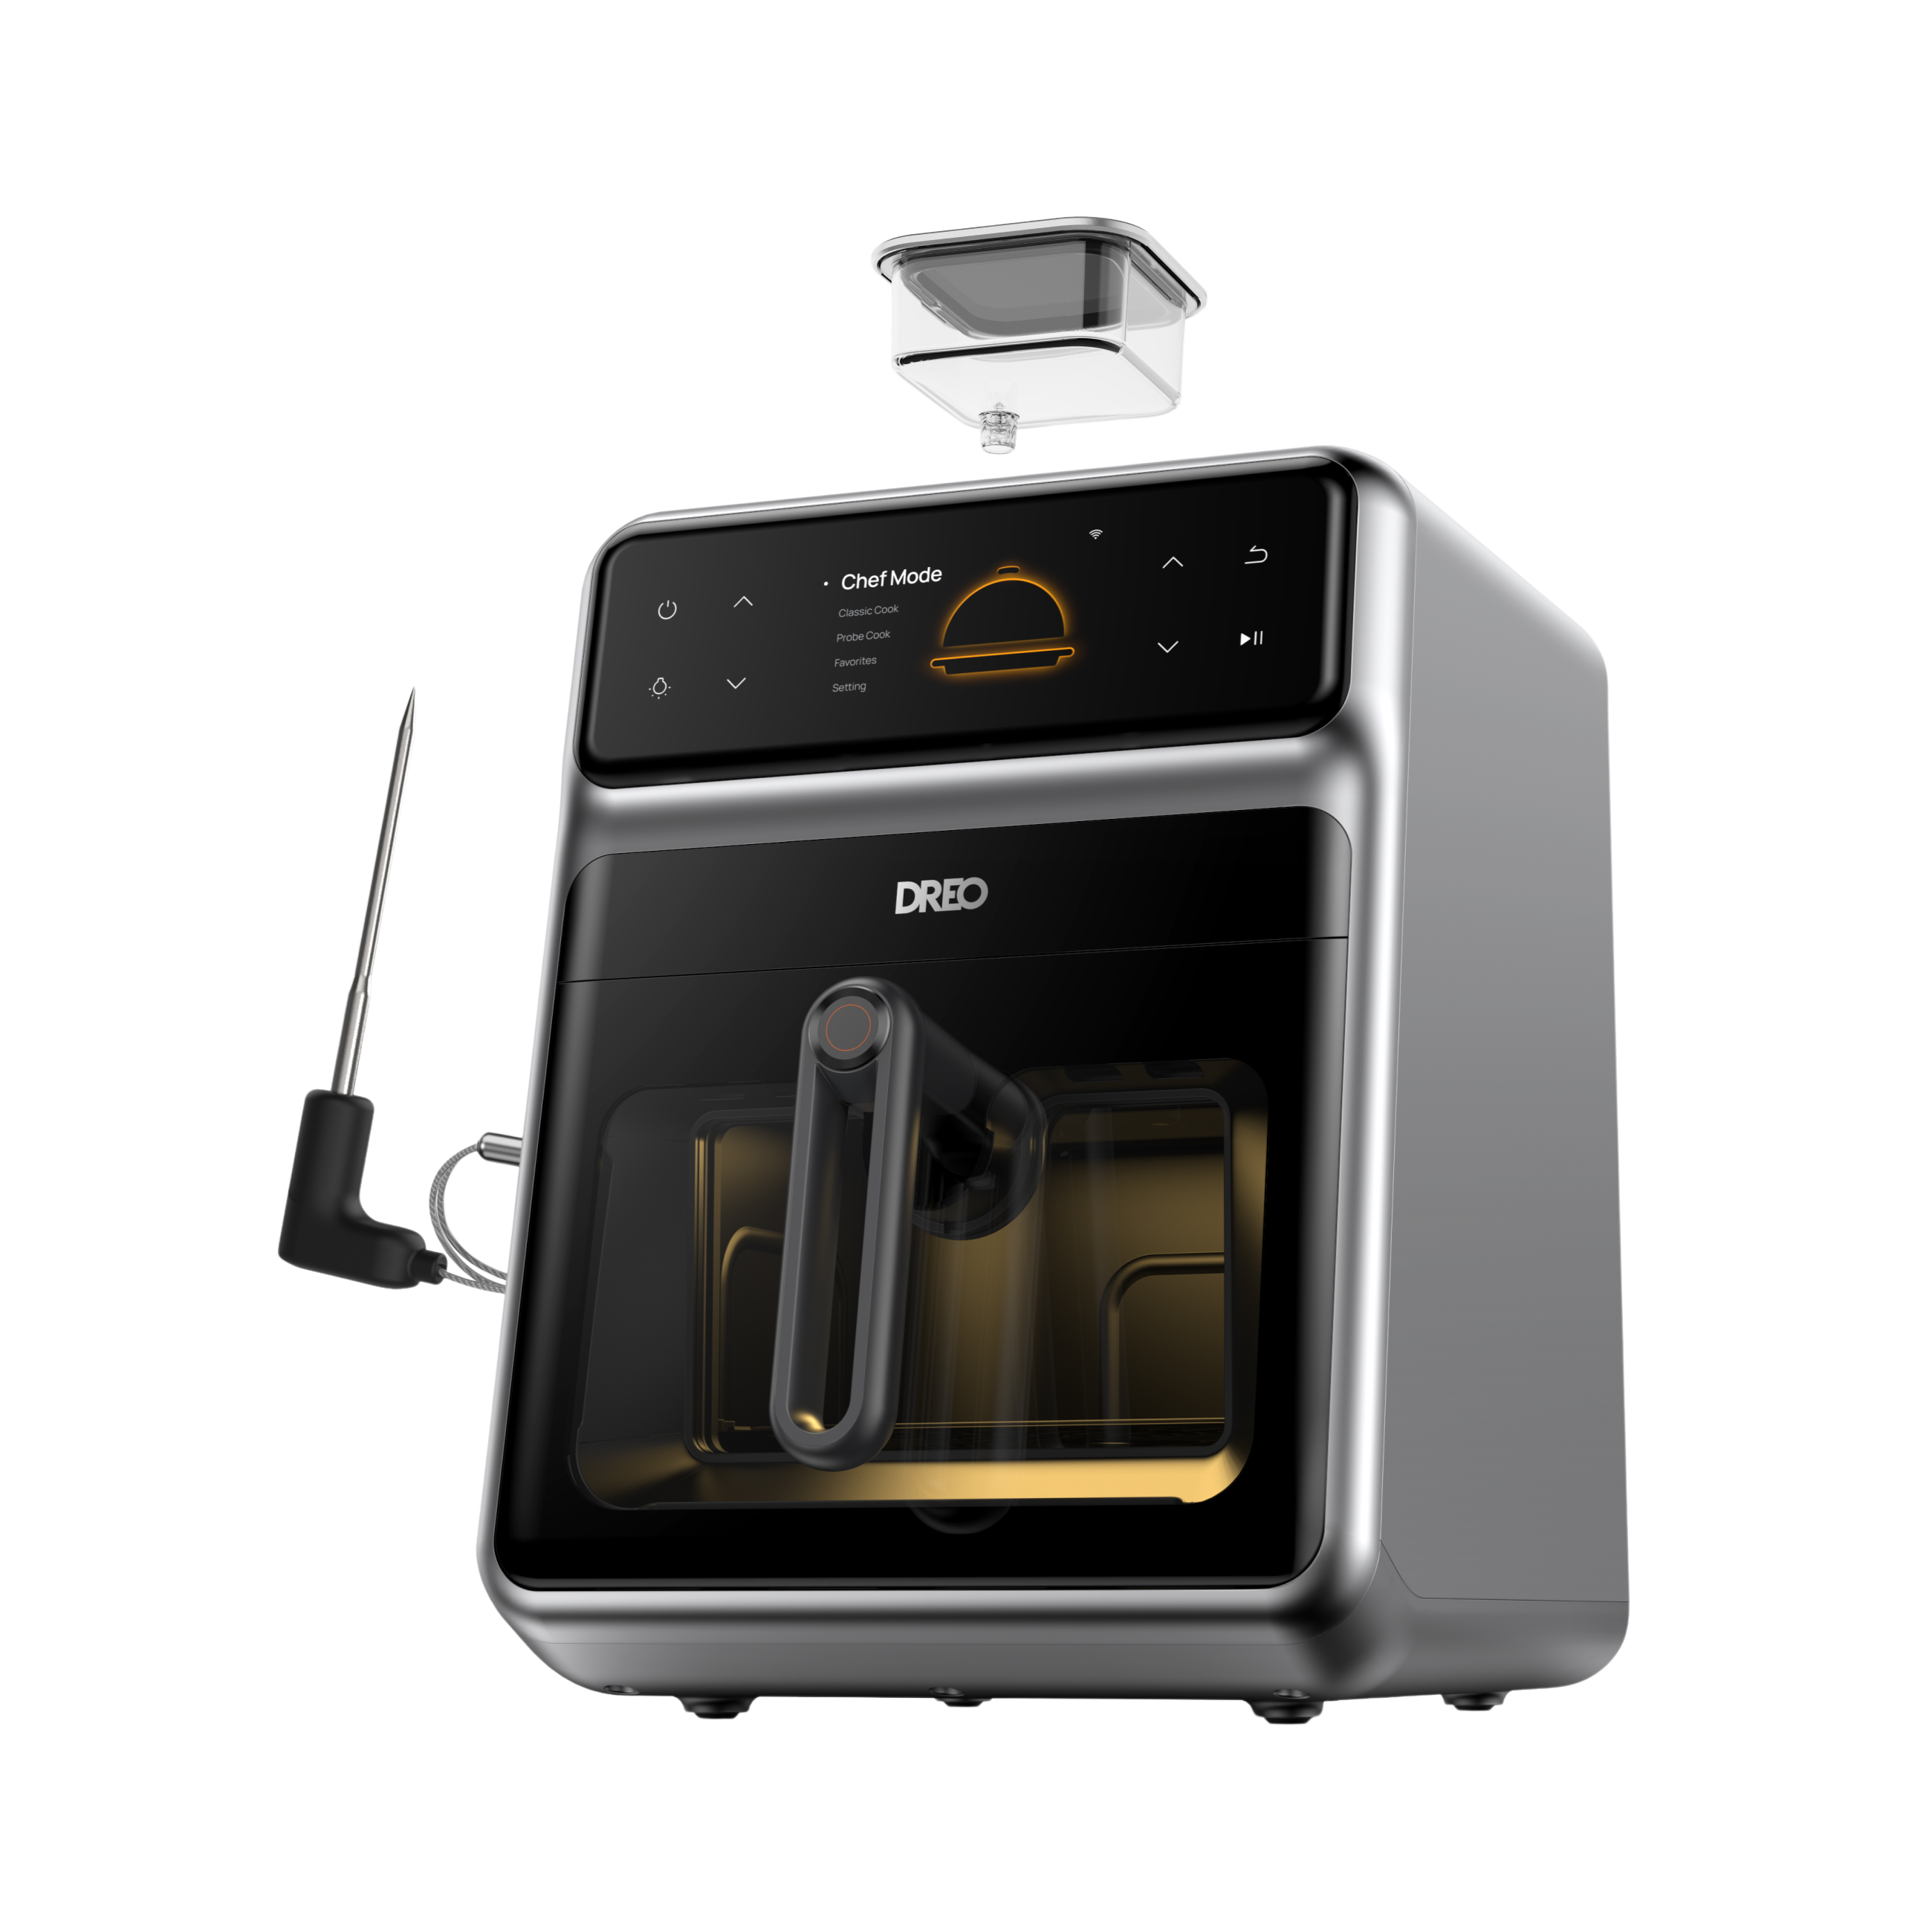 Product Review: DREO ChefMaker  Revolutionary Combi Fryer Cooking  Appliance - FSM Media